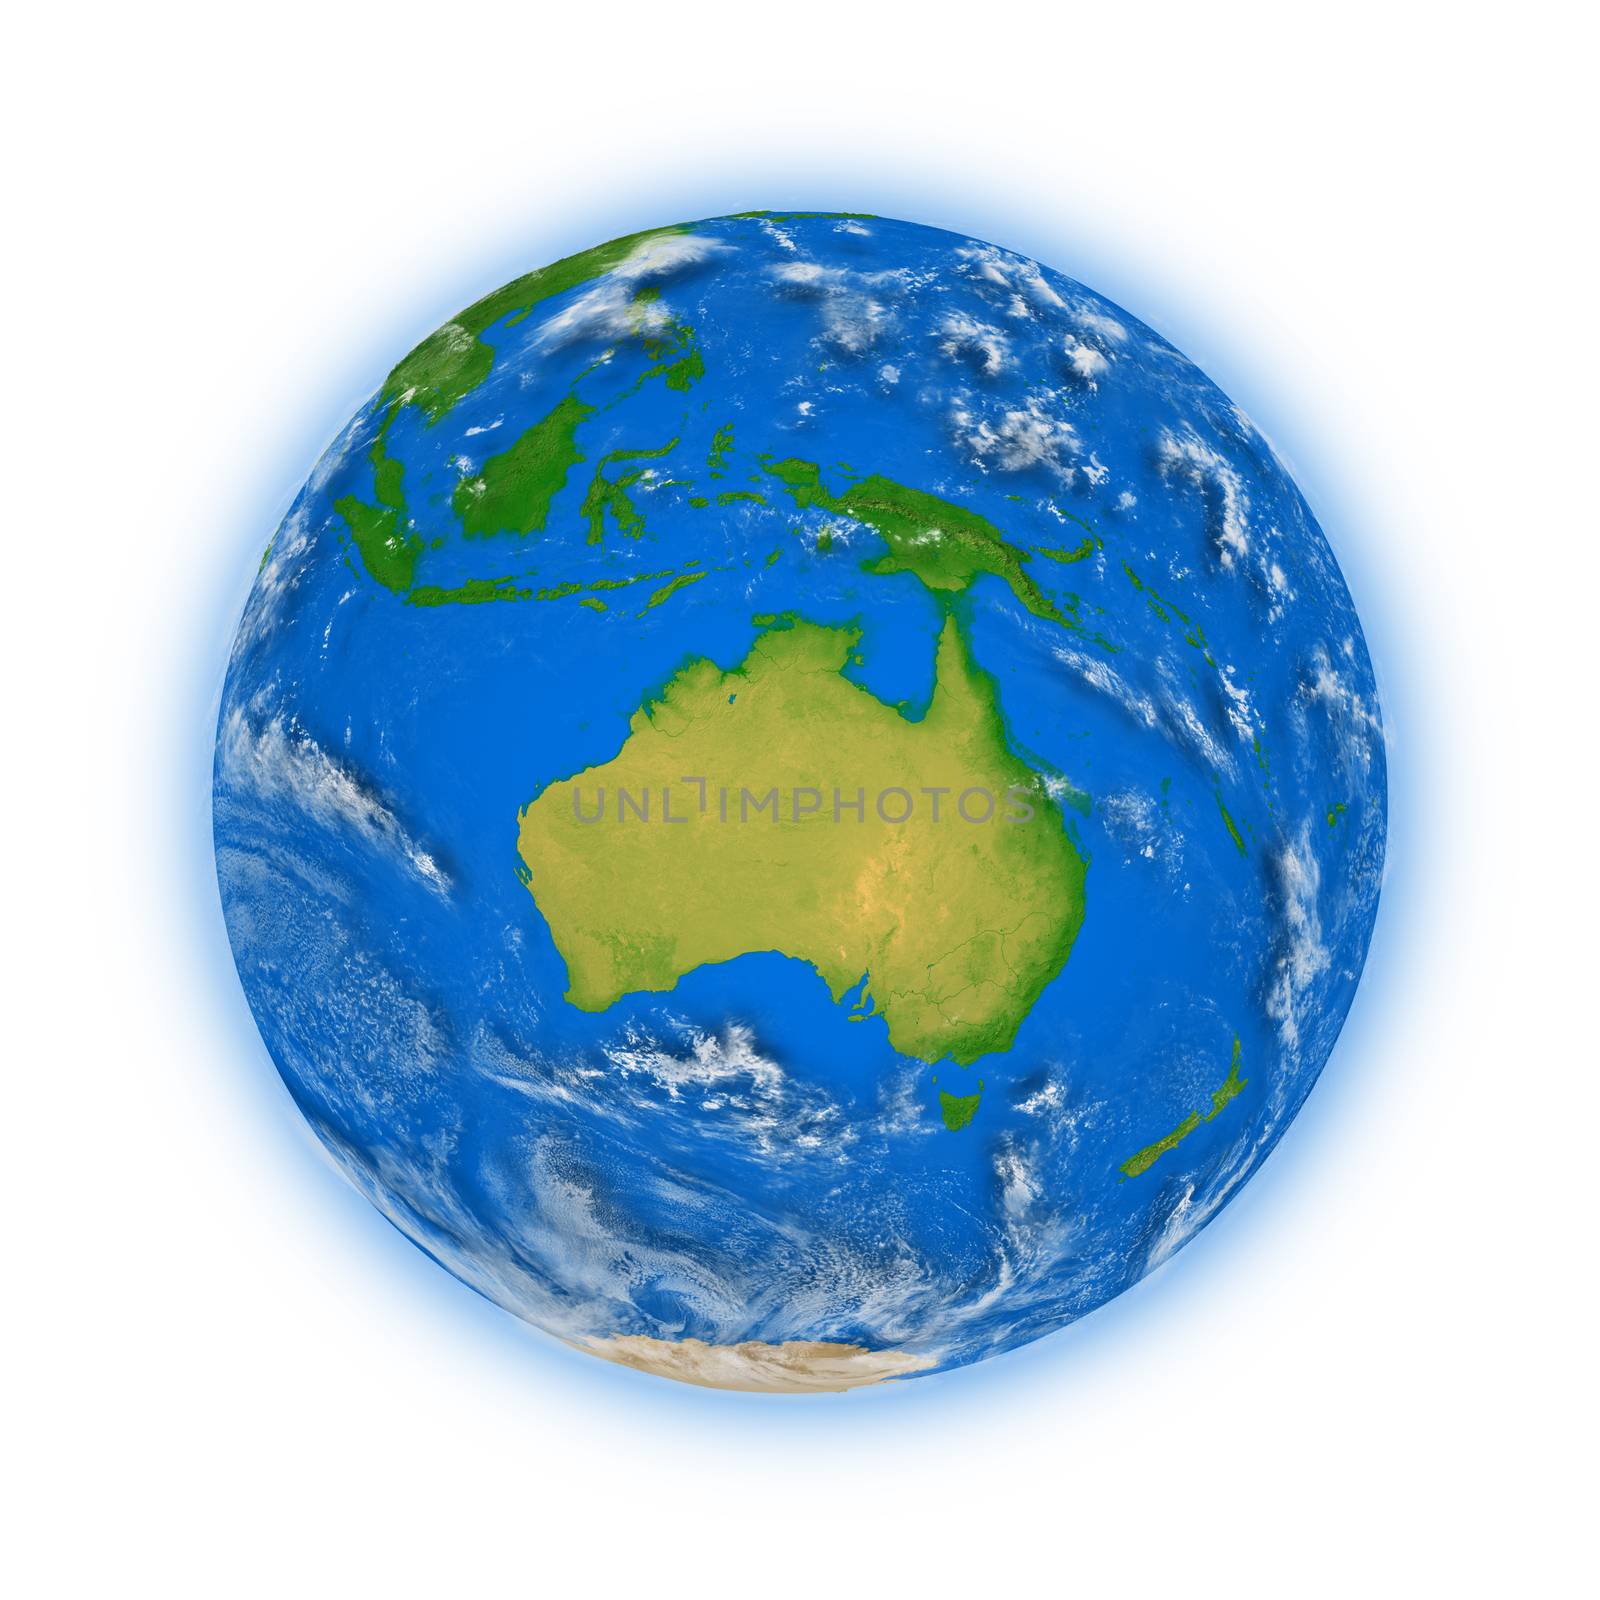 Australia on blue planet Earth isolated on white background. Highly detailed planet surface. Elements of this image furnished by NASA.